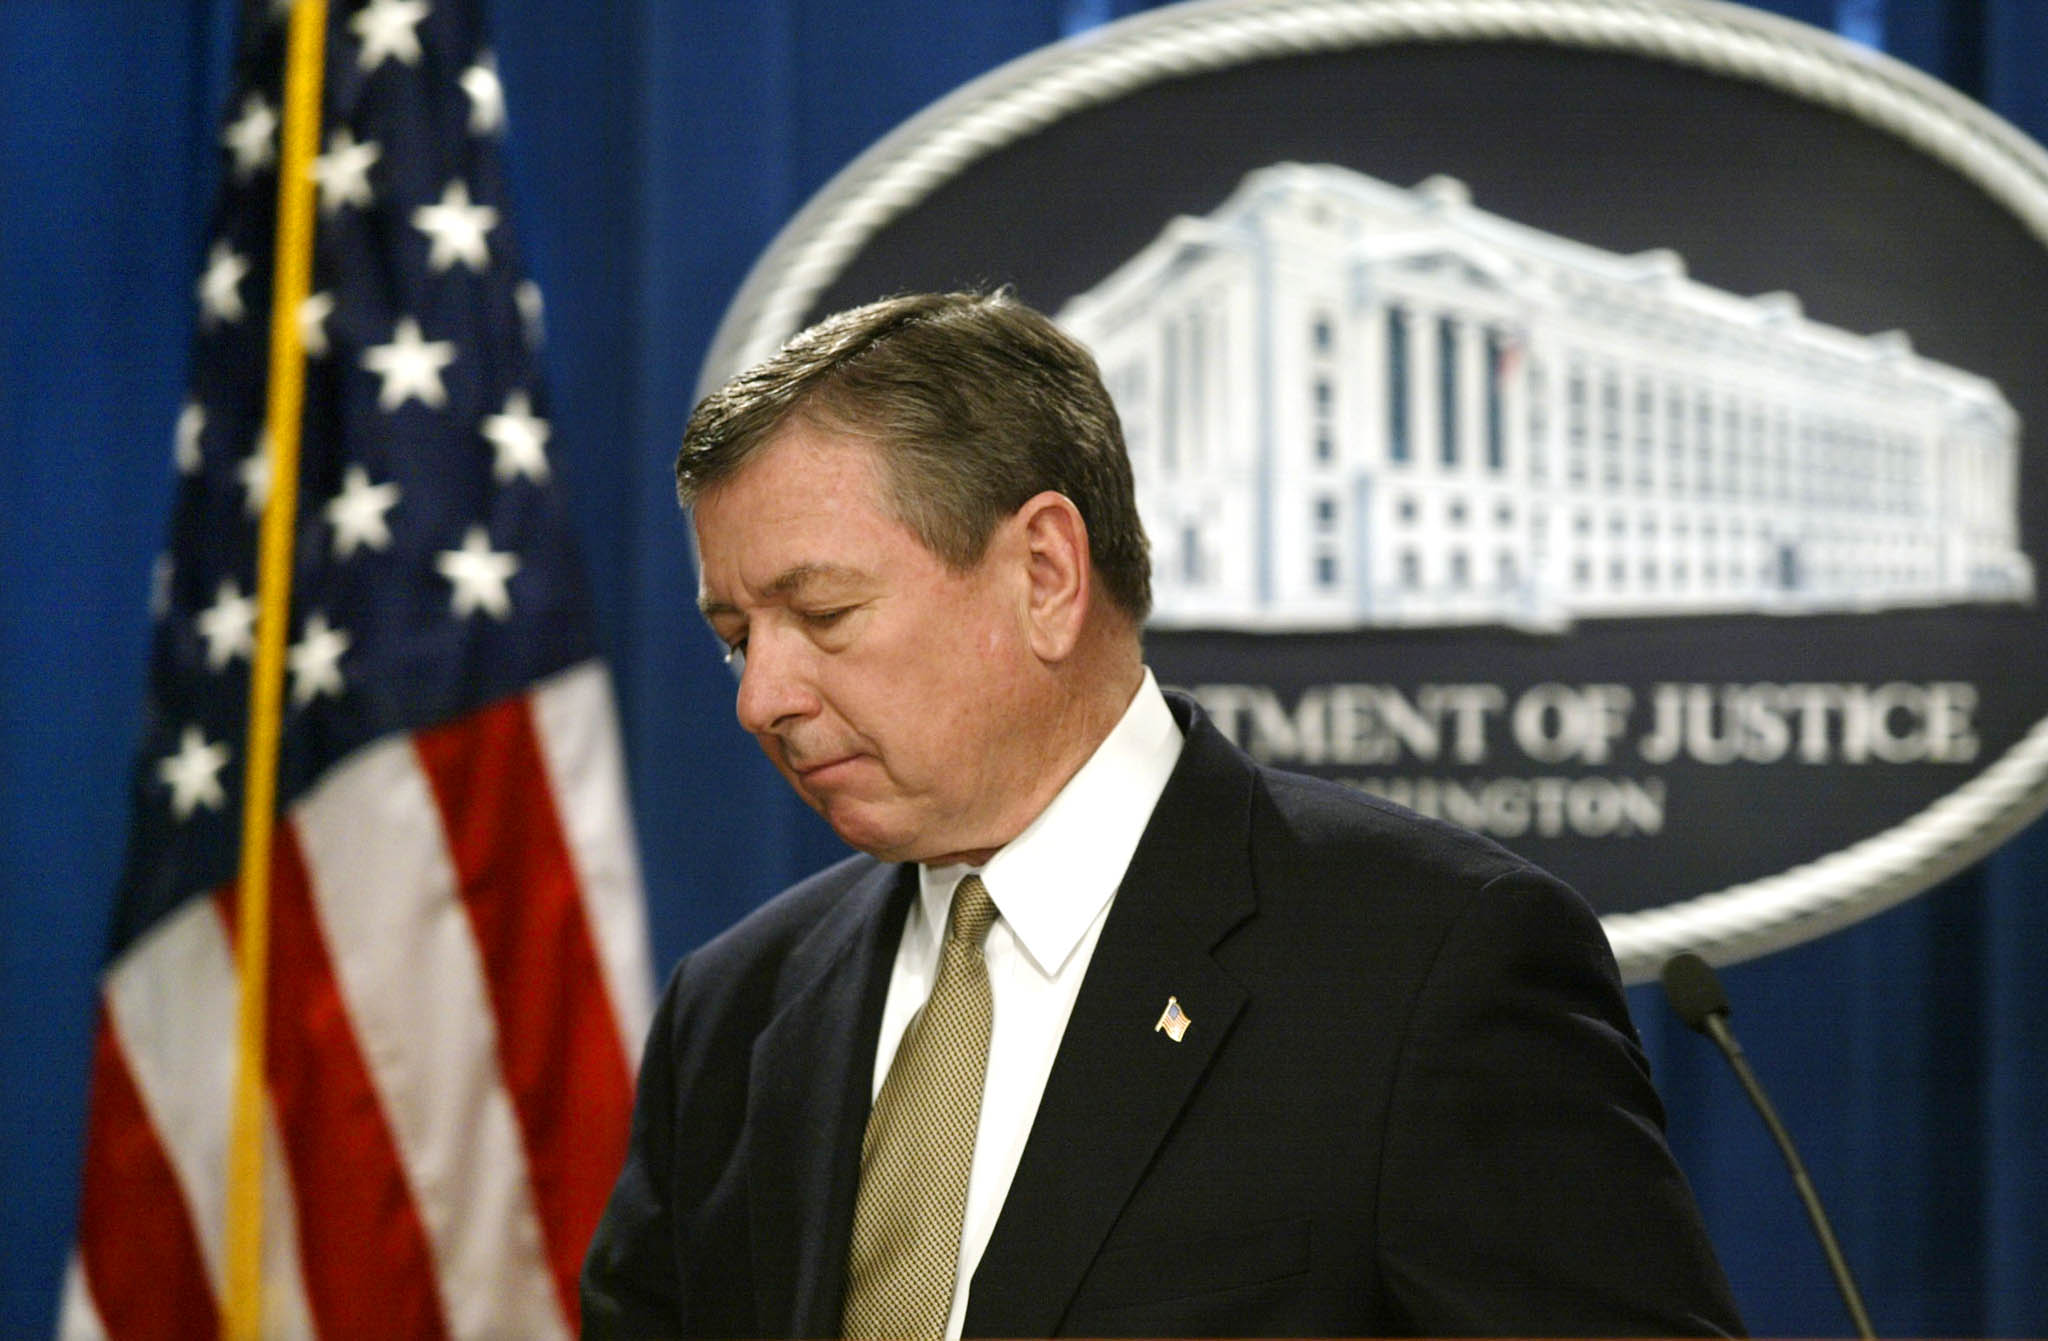 U.S. Attorney General John Ashcroft leaves the conference room at the Justice Department after addressing the media on new measures to protect children after the Supreme Court today struck down a law banning virtual child pornography, April 16, 2002. The court ruled against Ashcroft and said that the First Amendment protects pornography or other images that only appear to depict real children engaged in sex. REUTERS/Kevin Lamarque